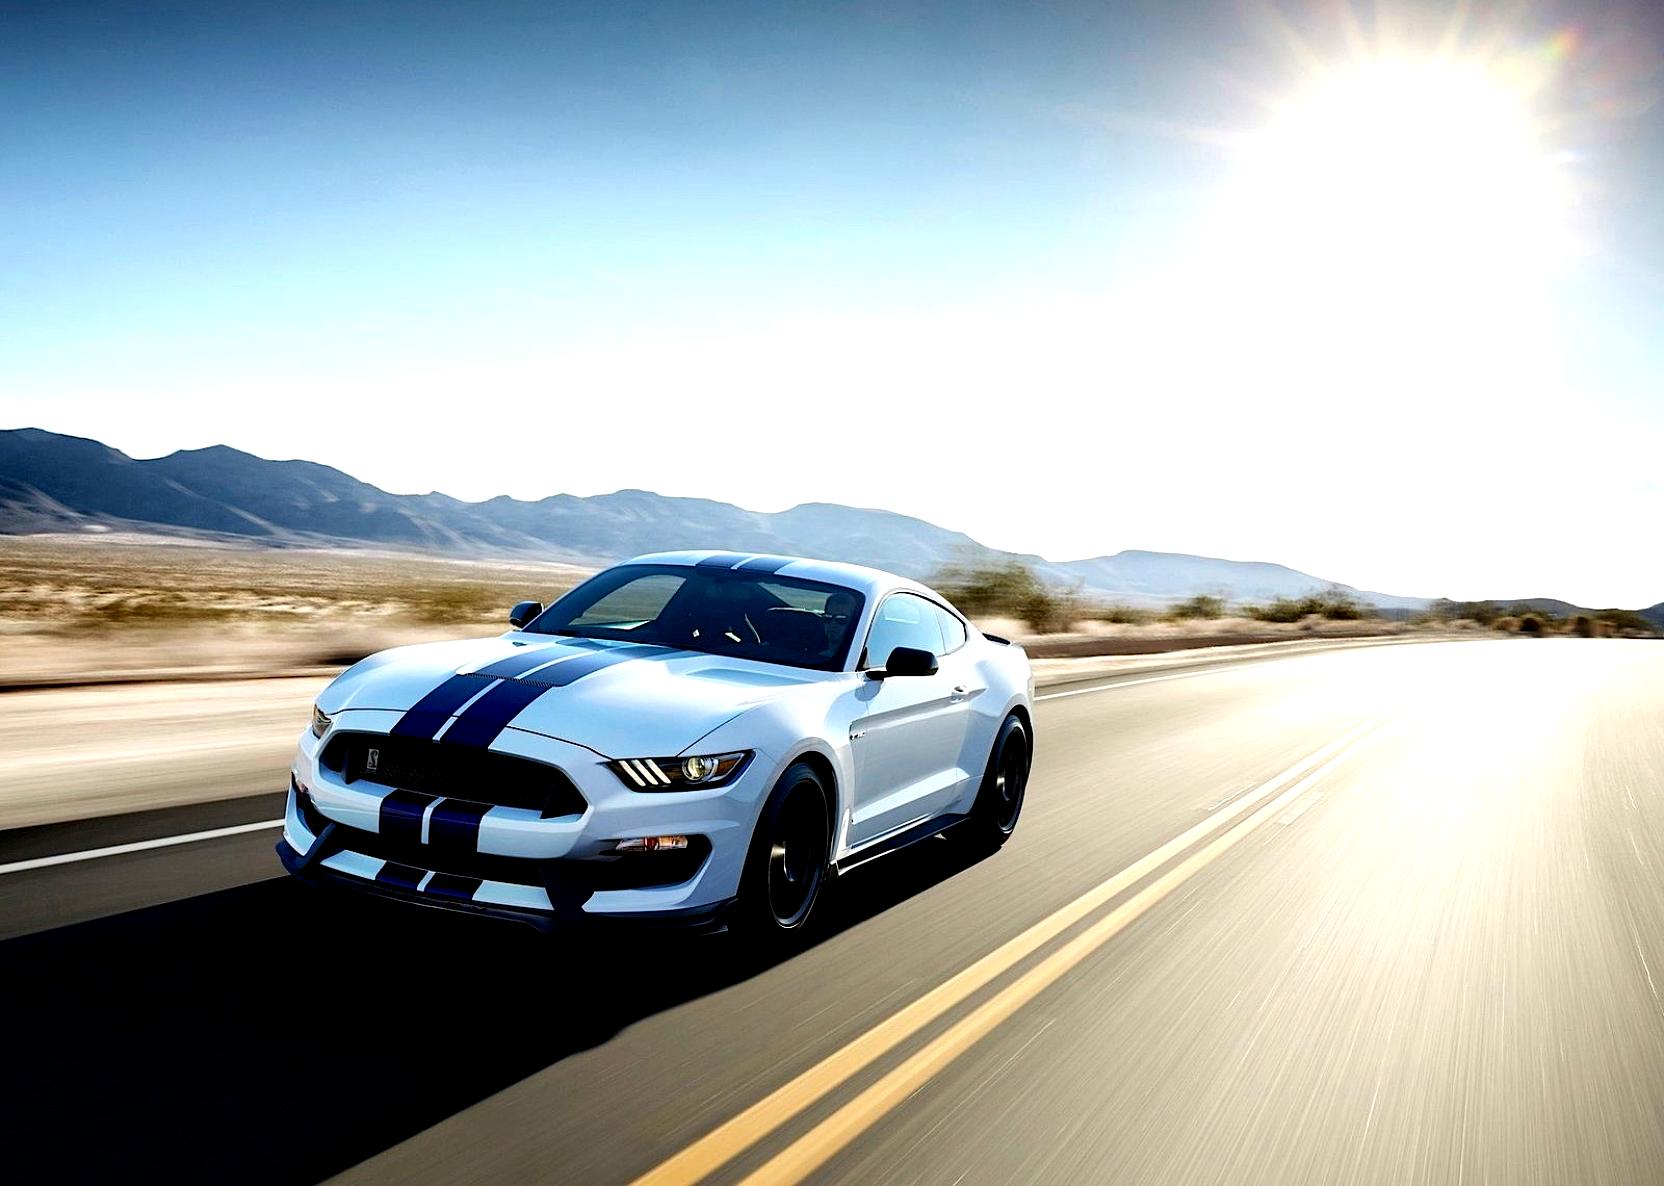 Ford Mustang Shelby GT350 2015 #15